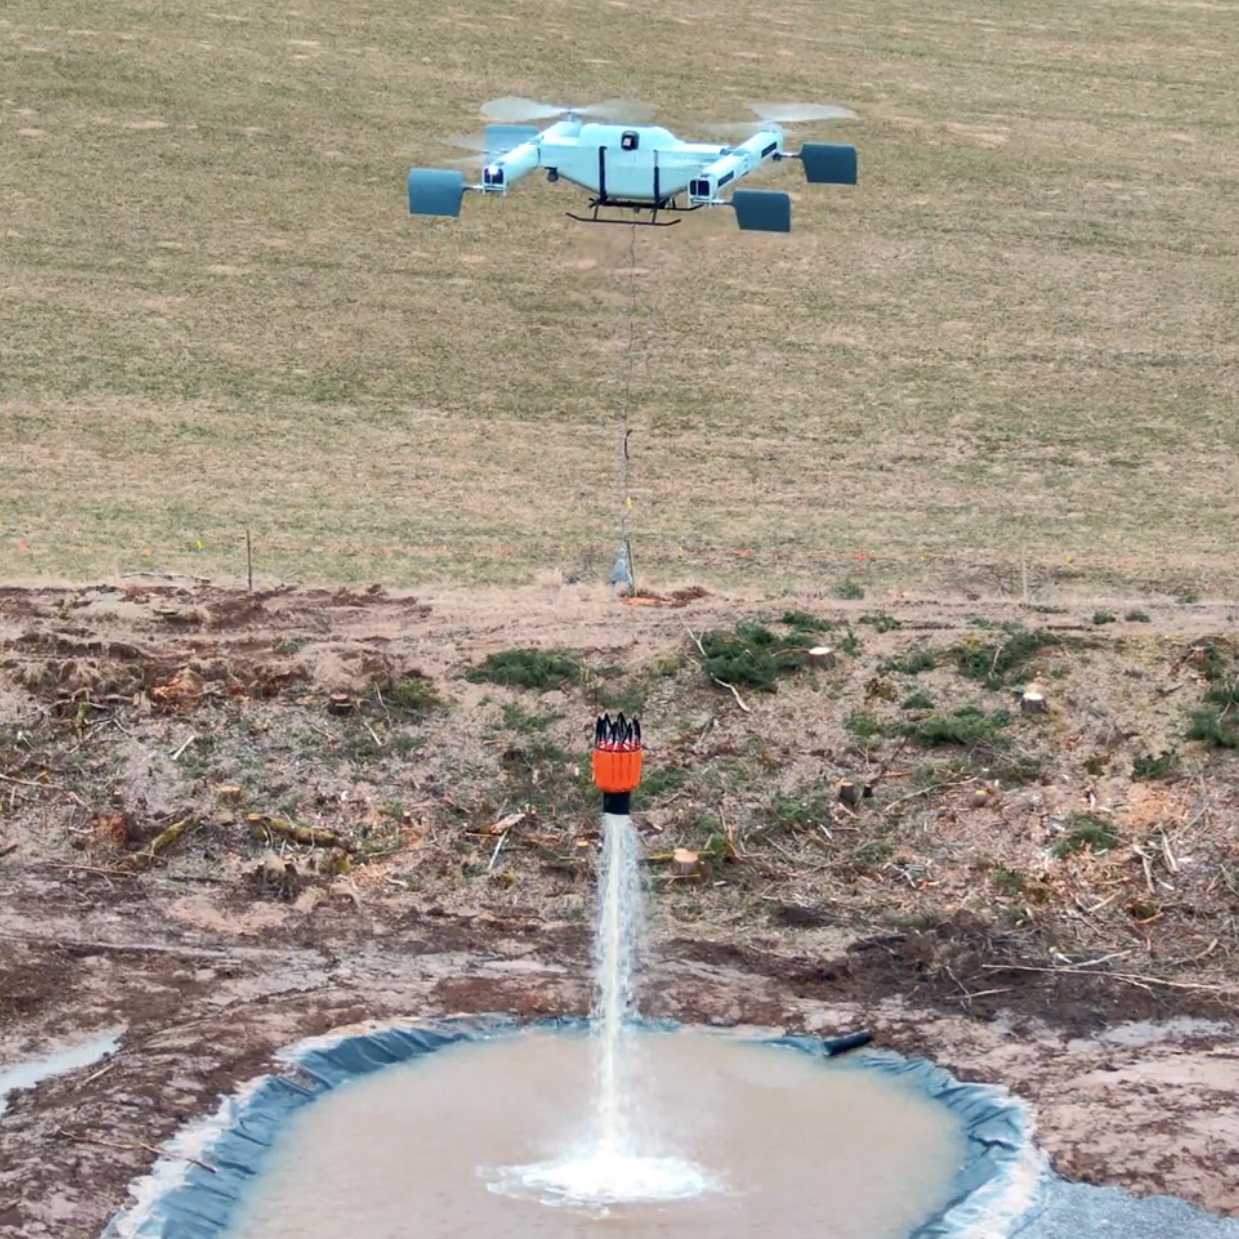 The FireSwarm ACC Thunderwasp Heavy-Lift Drone buckets water with medium sized Bambi Bucket during test flight.